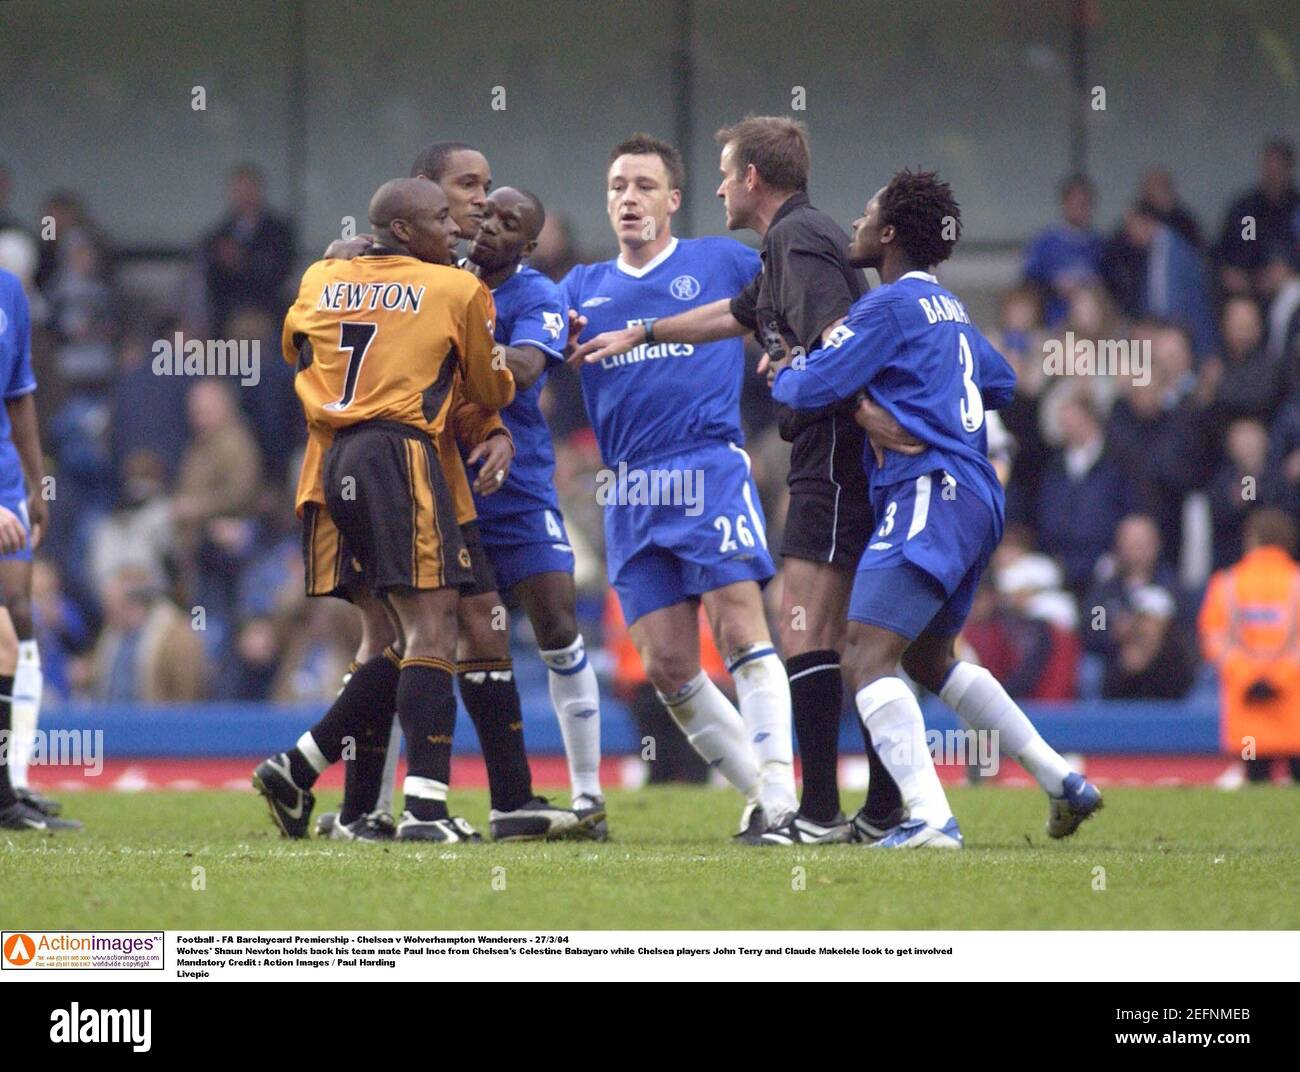 Football Fa Barclaycard Premiership Chelsea V Wolverhampton Wanderers 27 3 04 Wolves Shaun Newton Holds Back His Team Mate Paul Ince From Chelsea S Celestine Babayaro While Chelsea Players John Terry And